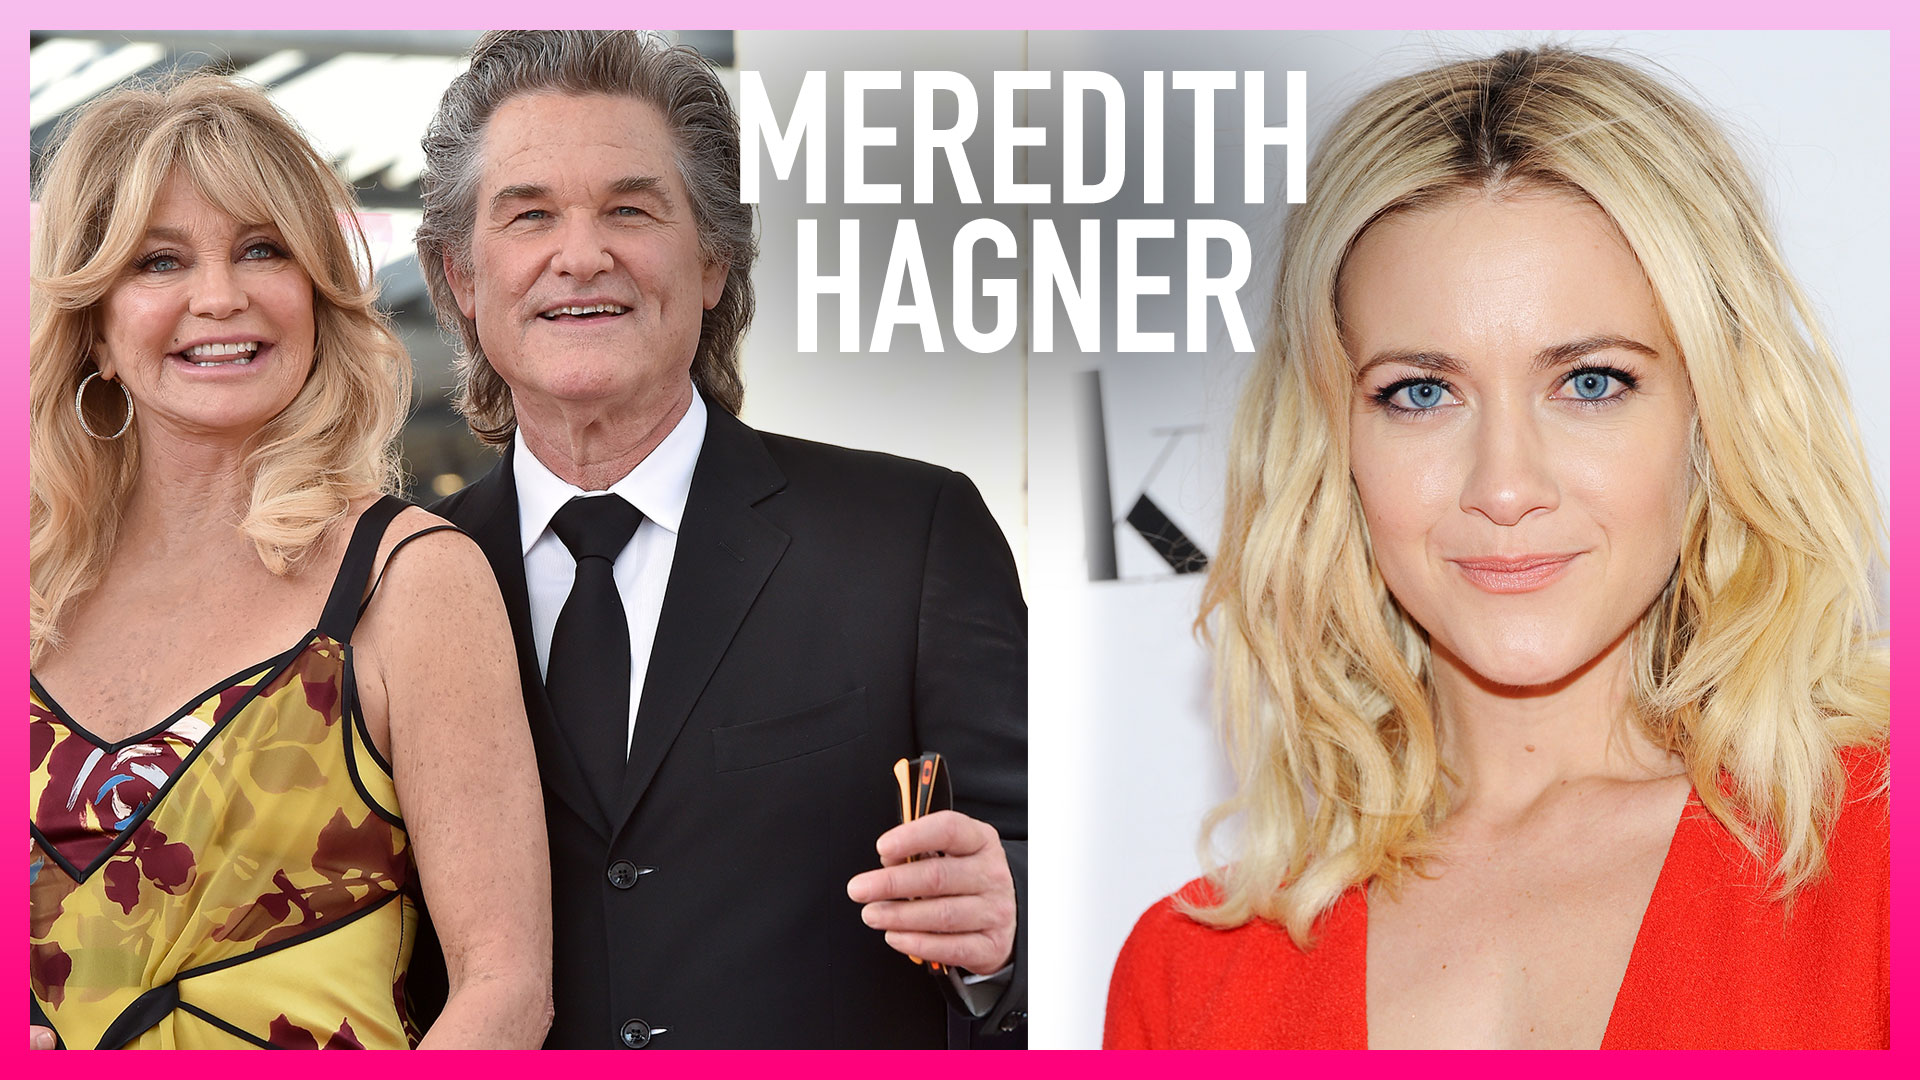 Hagner younger meredith Meredith Hagner